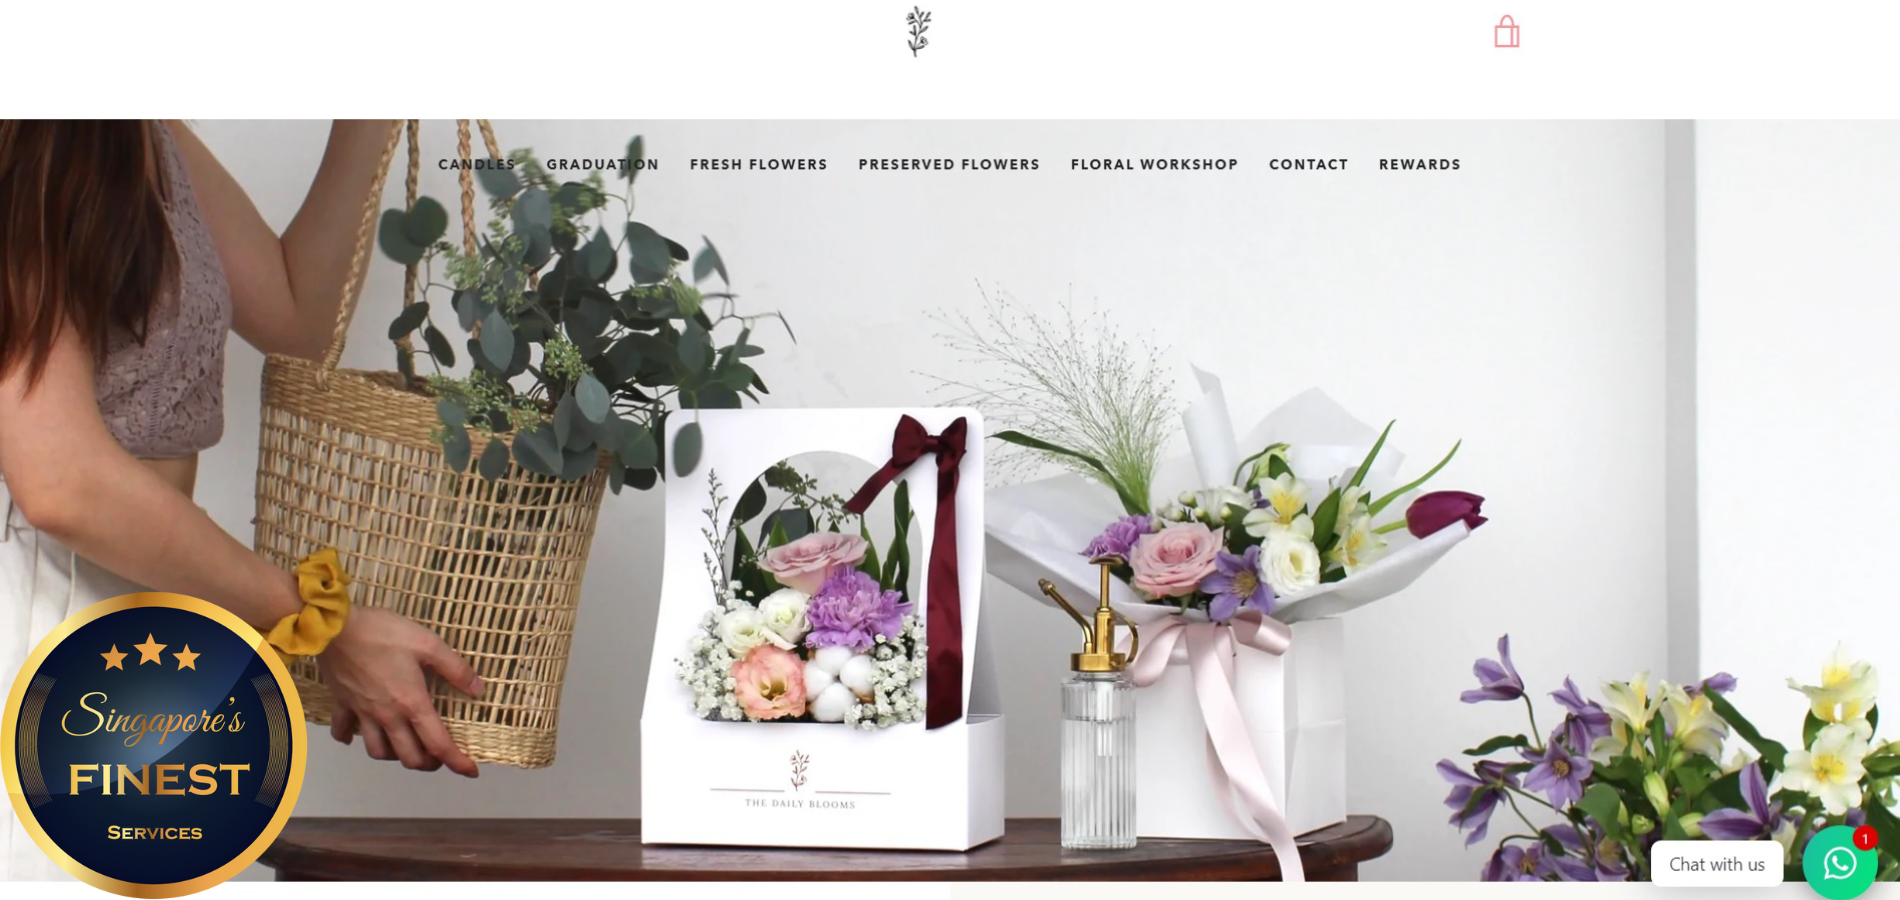 The Finest Flower Delivery Services in Singapore